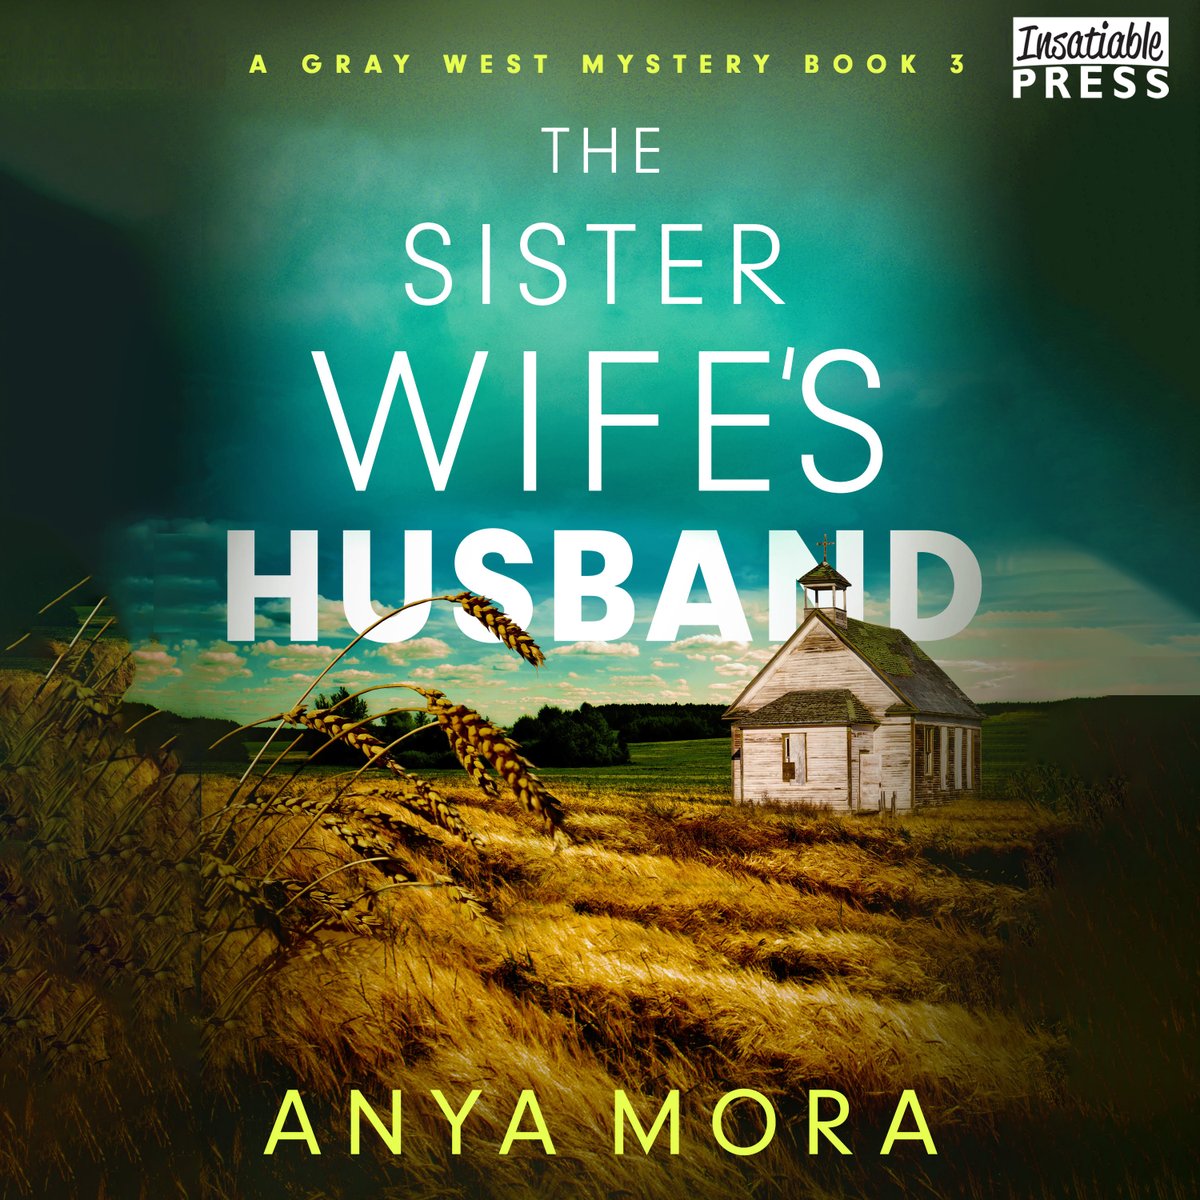 My husband has always been dangerous. But I never thought he was a killer. One phone message changes everything.

THE SISTER WIFE'S HUSBAND, the next Gray West Mystery, from  narrated by Subhadra Newton.

Now in audio from Vibrance Press.